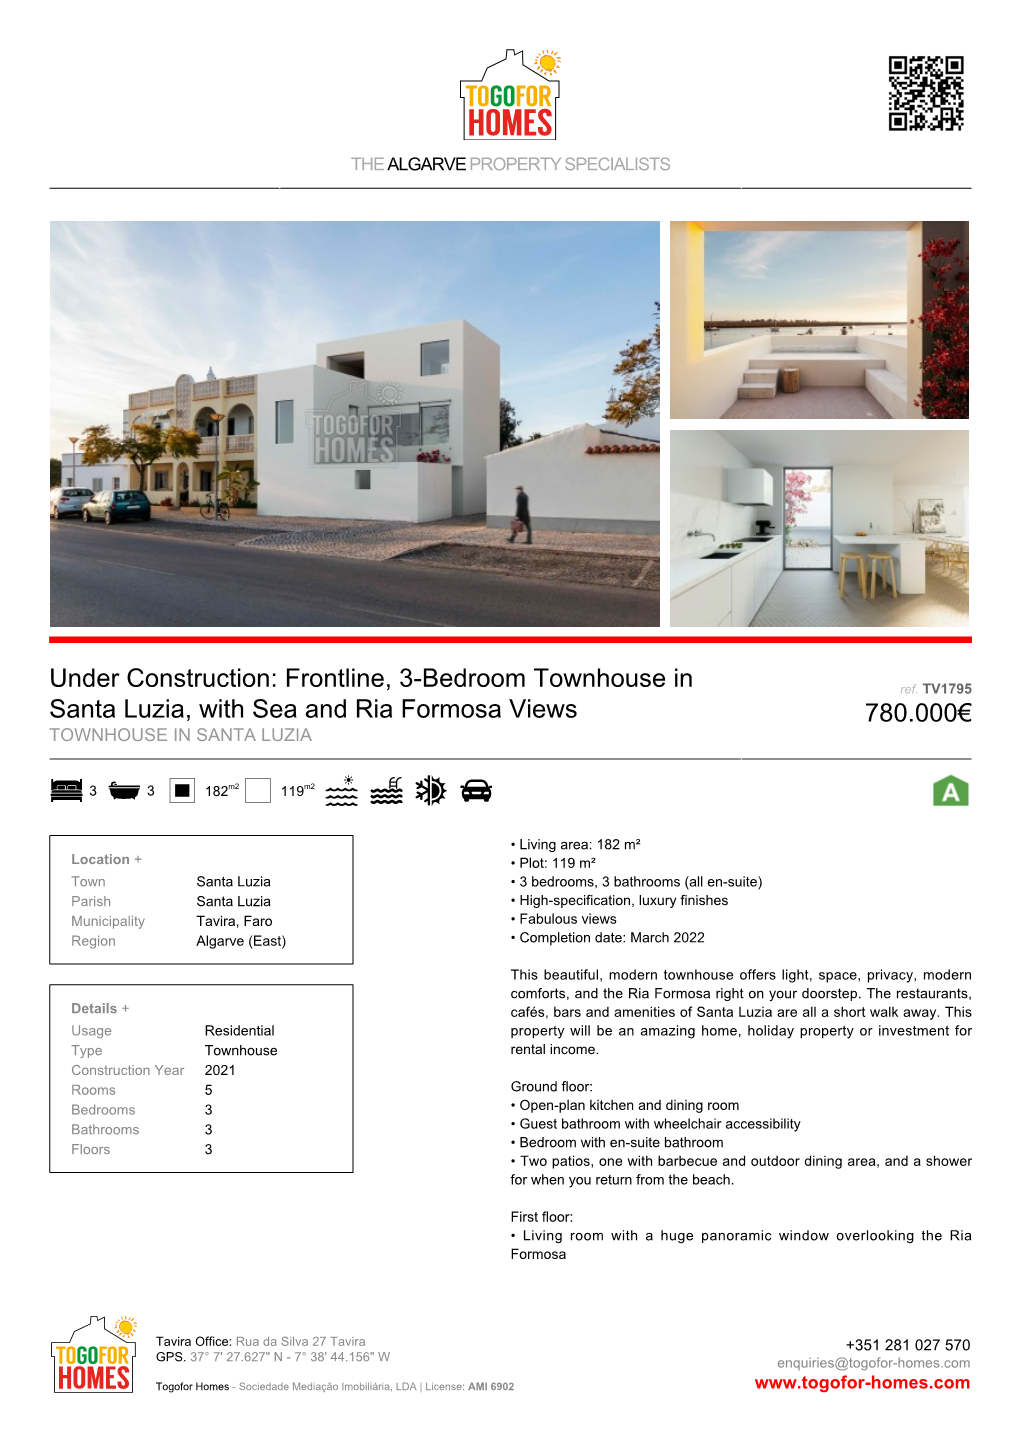 Frontline, 3-Bedroom Townhouse in Santa Luzia, with Sea and Ria Formosa Views 780.000